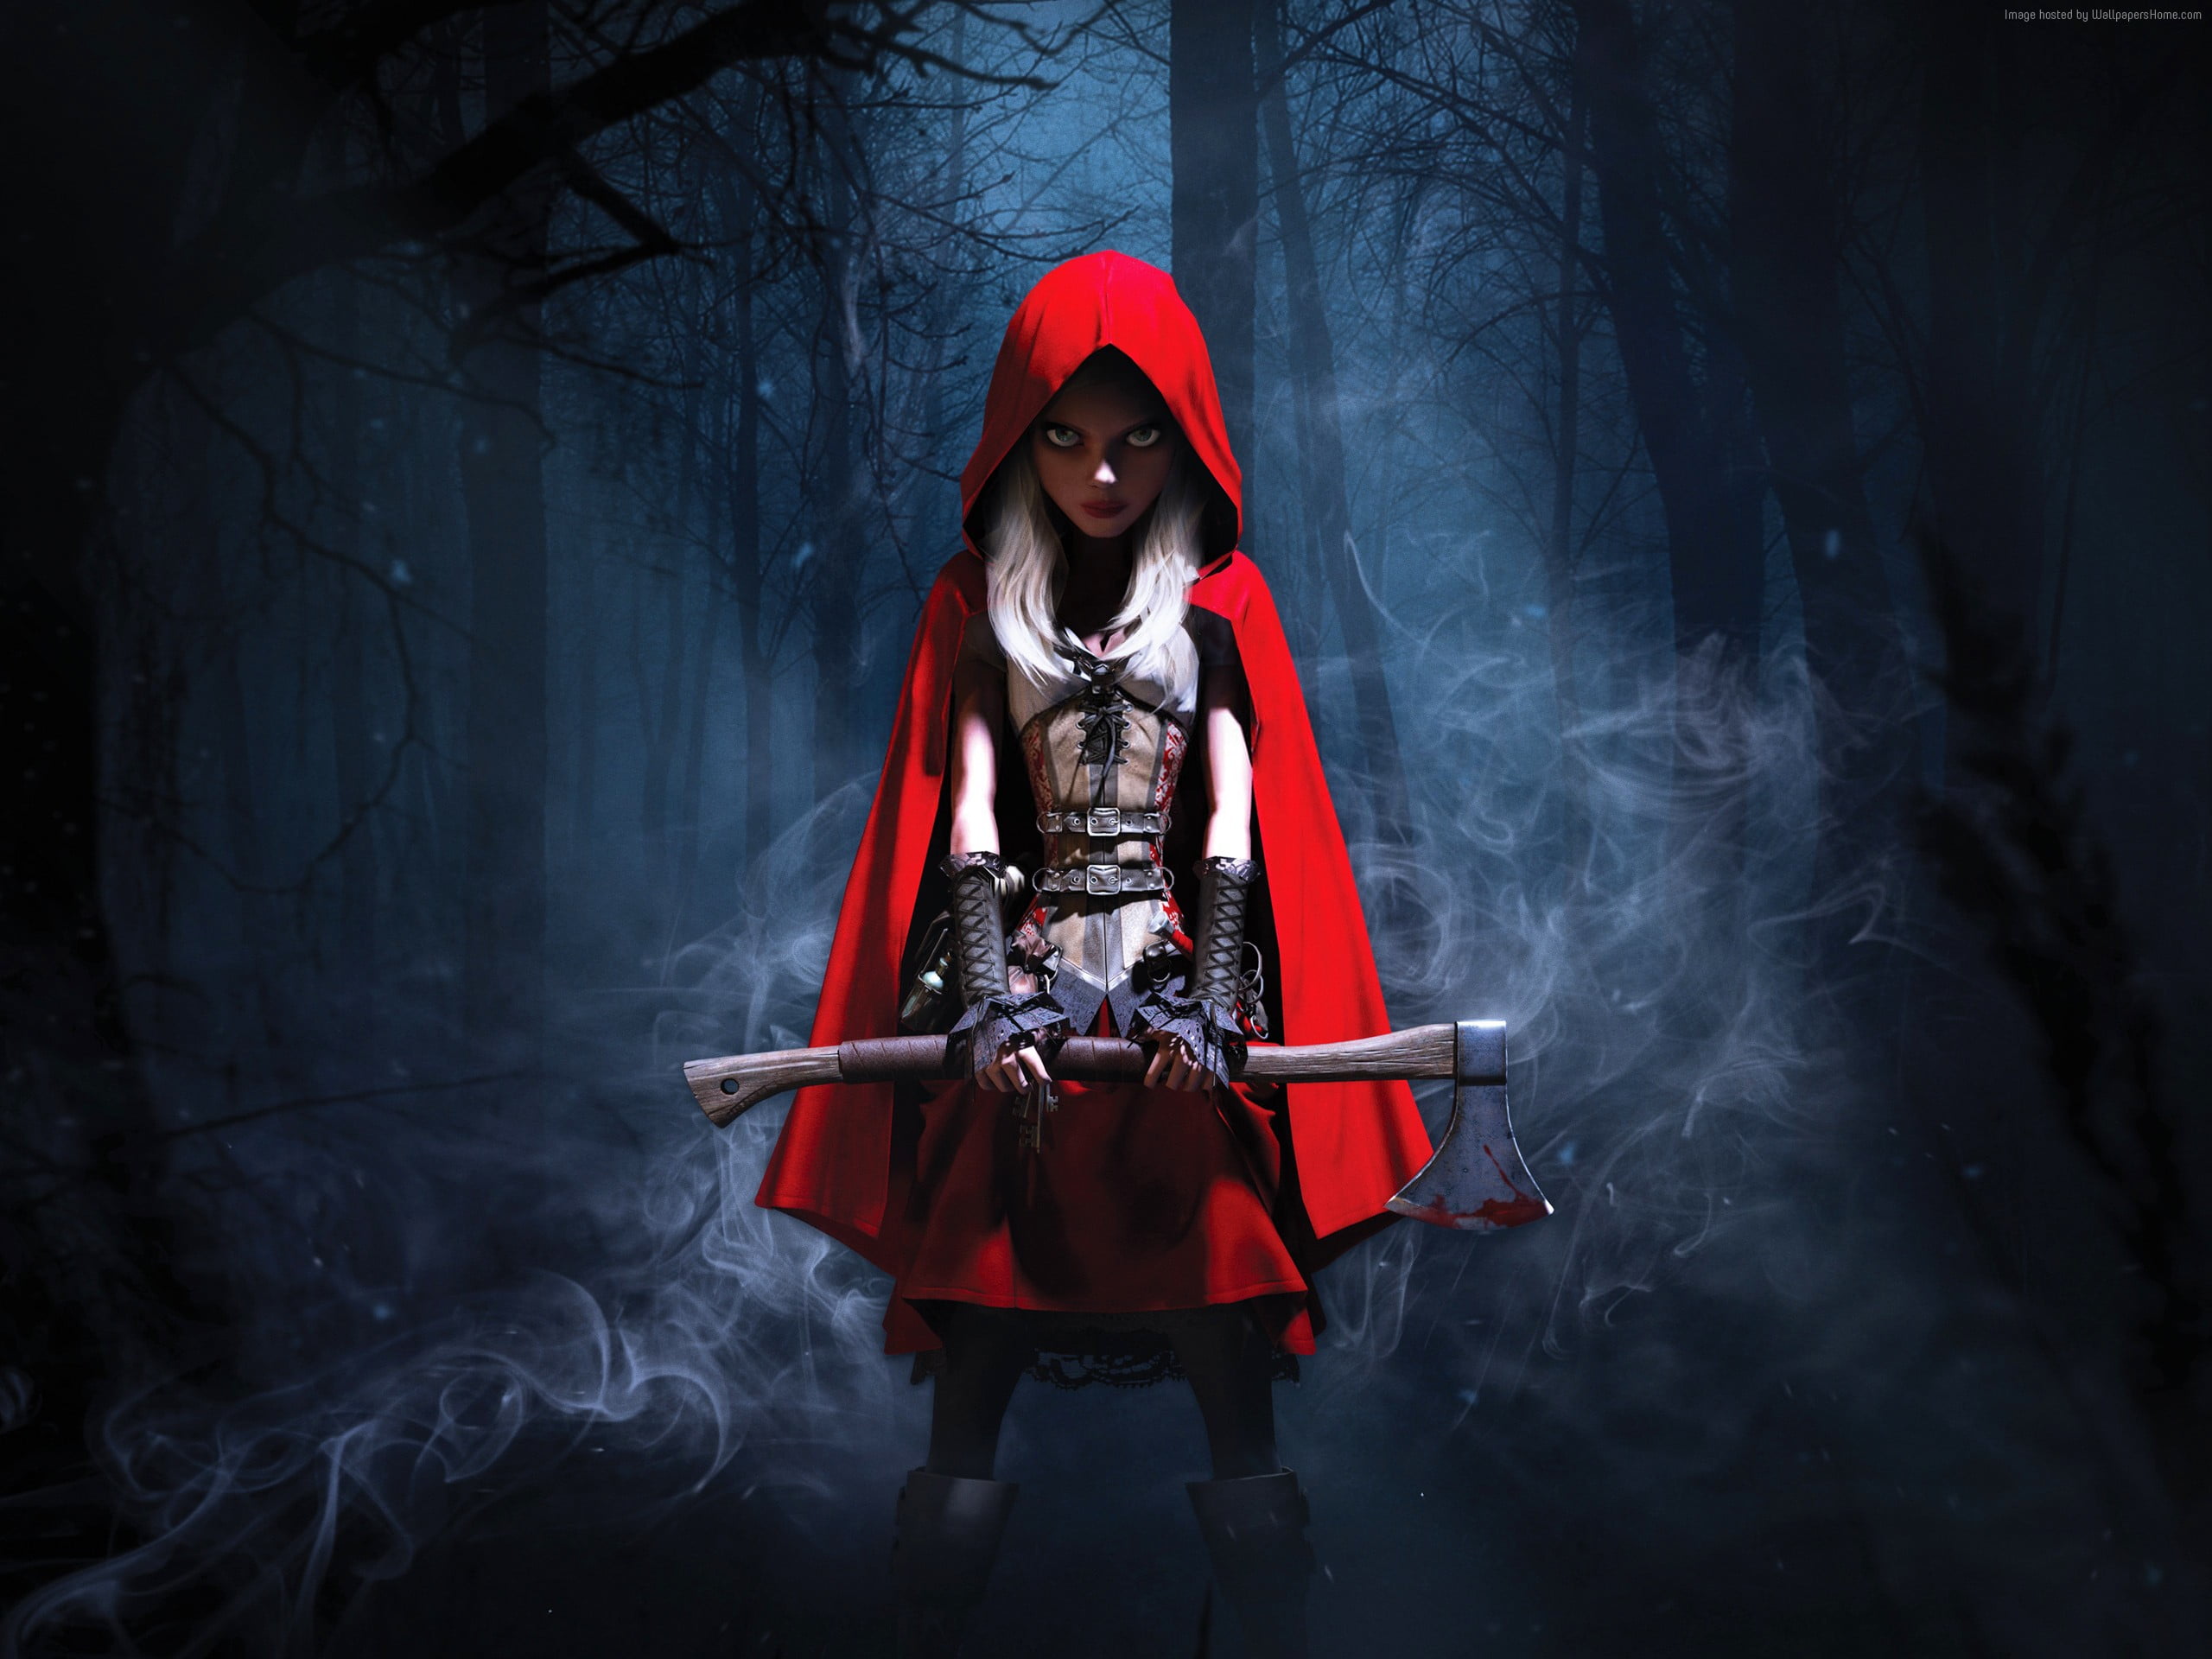 axe wallpaper,red,darkness,cg artwork,photography,fictional character